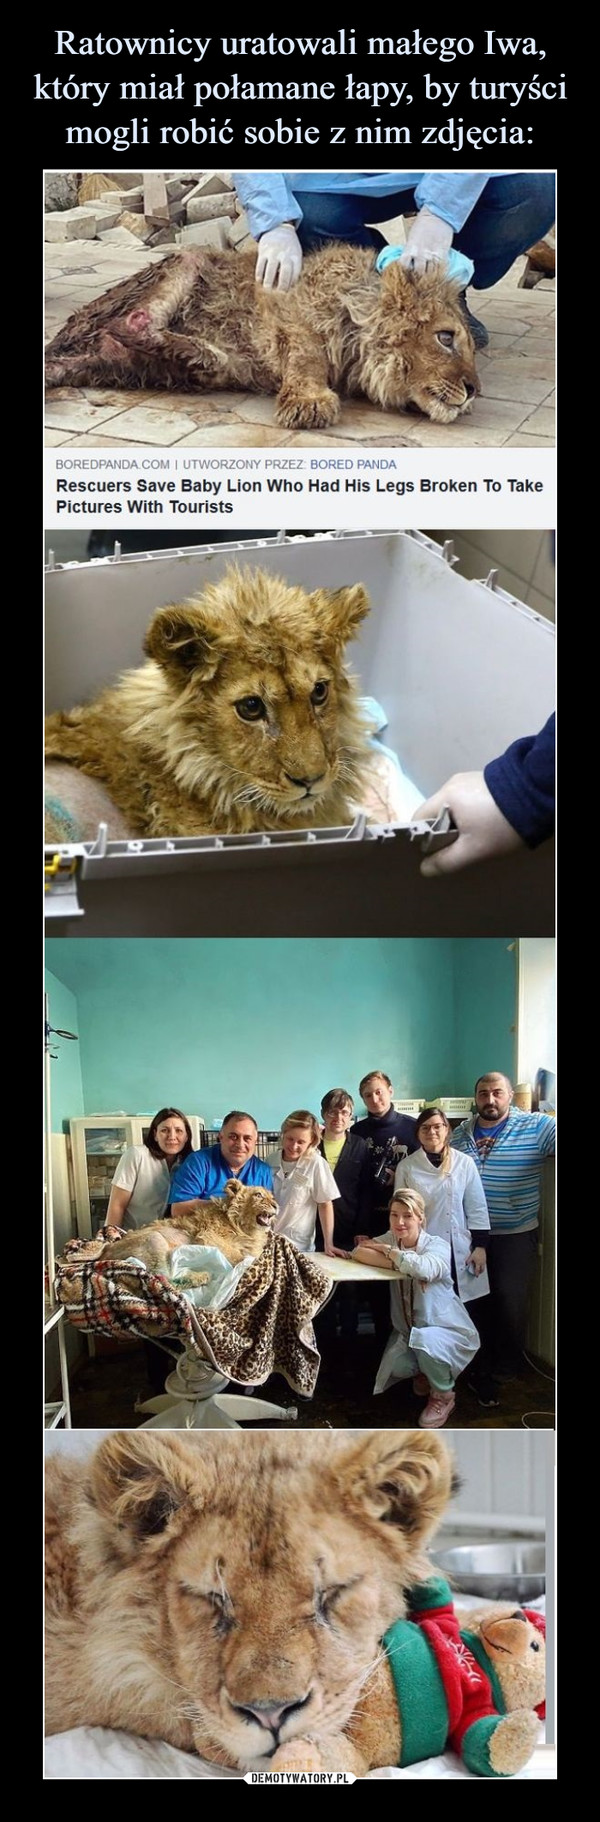  –  Rescuers save baby lion who had his legs broken to take pictures with tourists